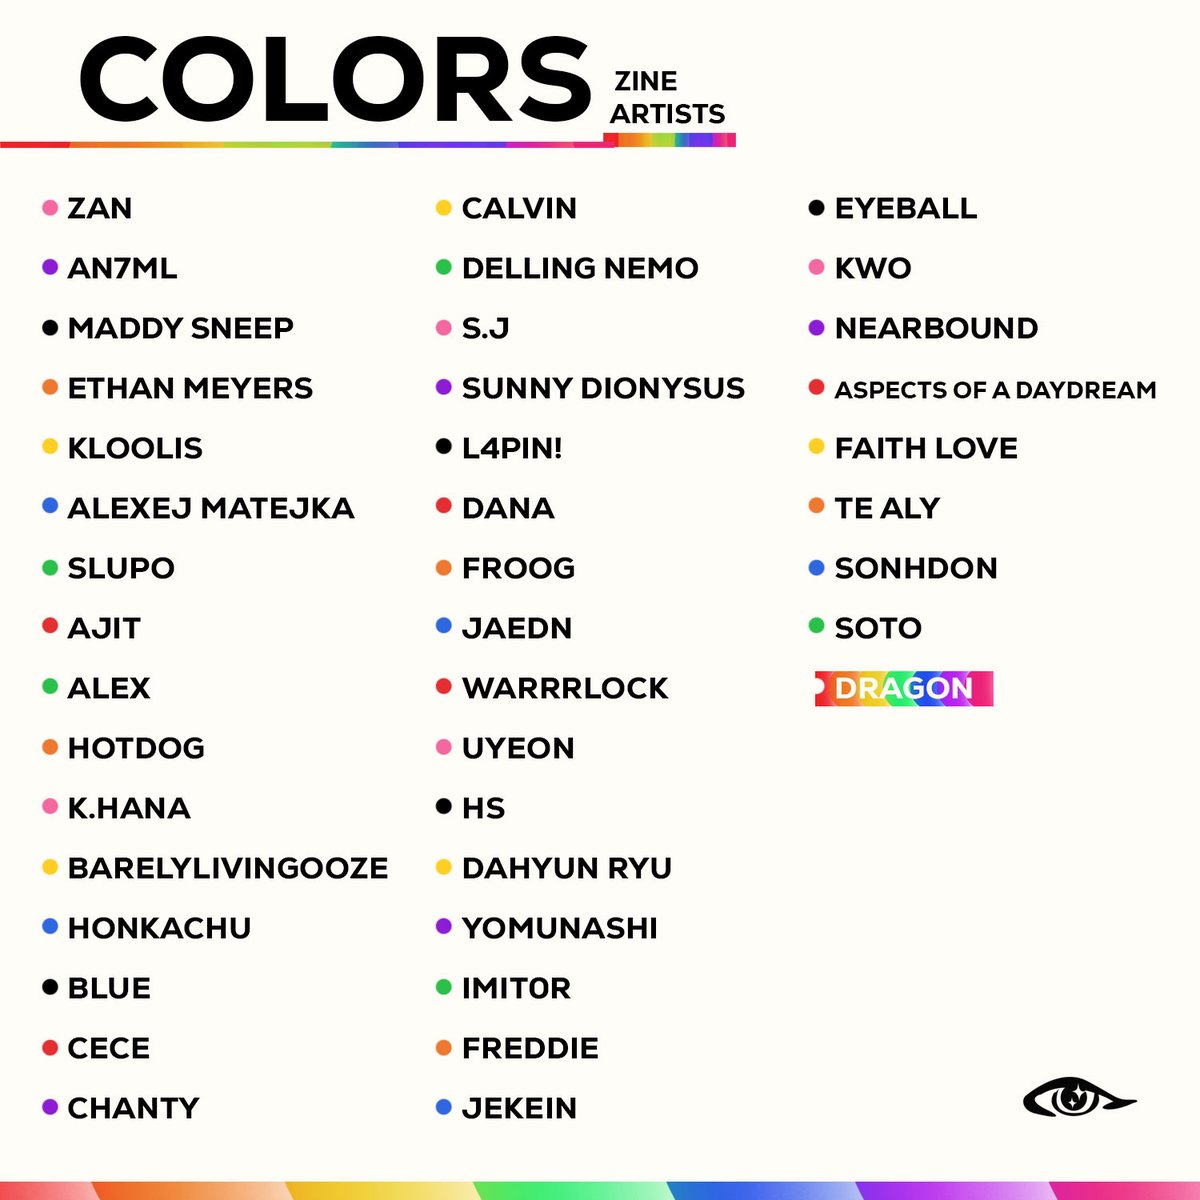 Meet the artists for Vision Fever's Colors Zine 2024!